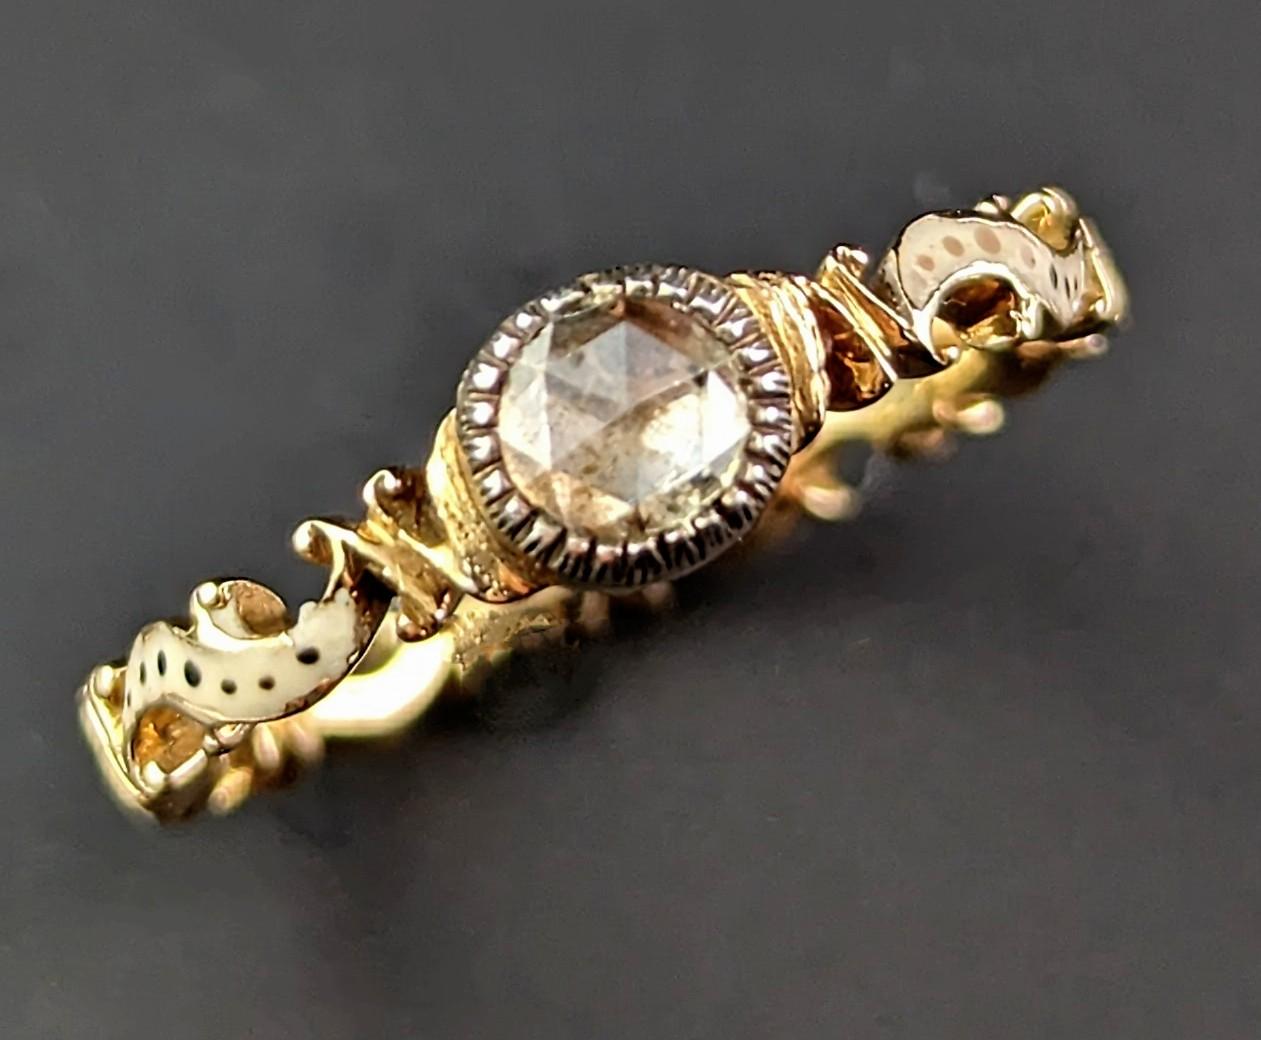 You cannot help but be enchanted by this superb antique mid 18th century Diamond solitaire ring.

A beautifully crafted piece with elements of the Rococo revival style, the scrolling and delicately shaped gold band featuring an off white and black